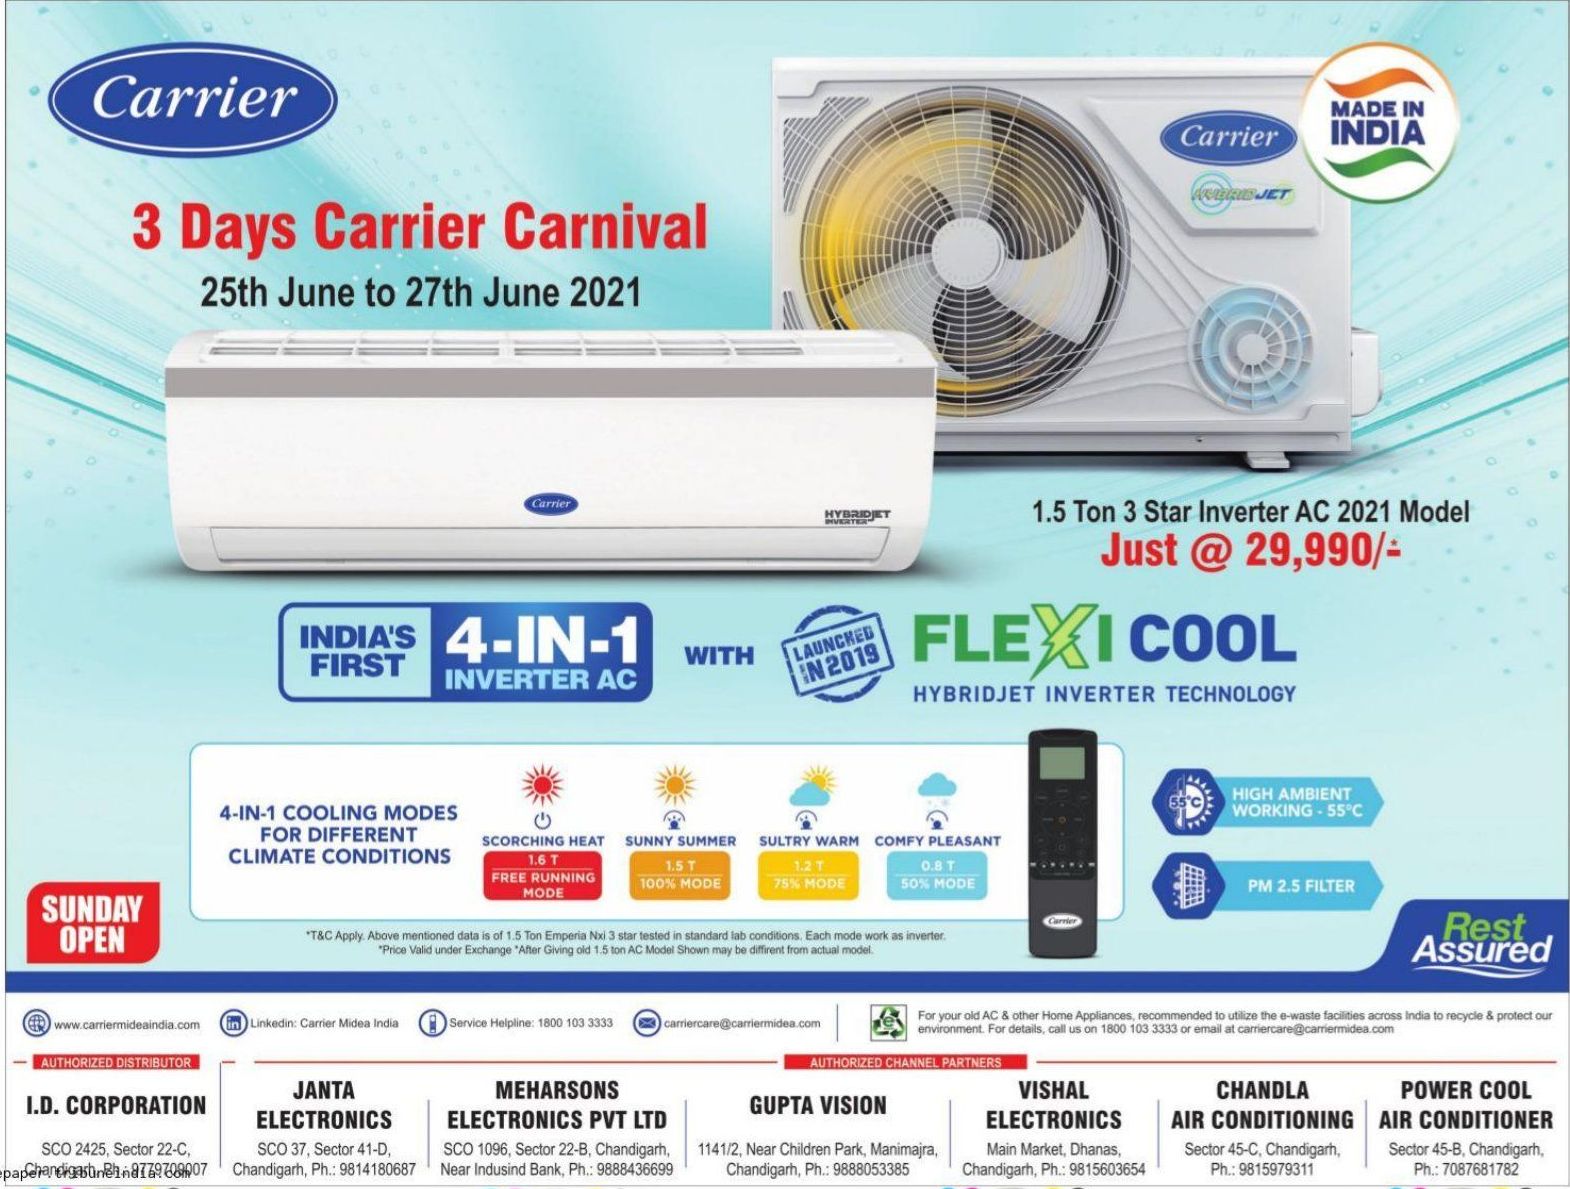 Carrier-3-Days-Carrier-Carnival-Indias-First-4-In-1-Inverter-Ac-Ad-Tribune-Chandigarh-25-06-2021